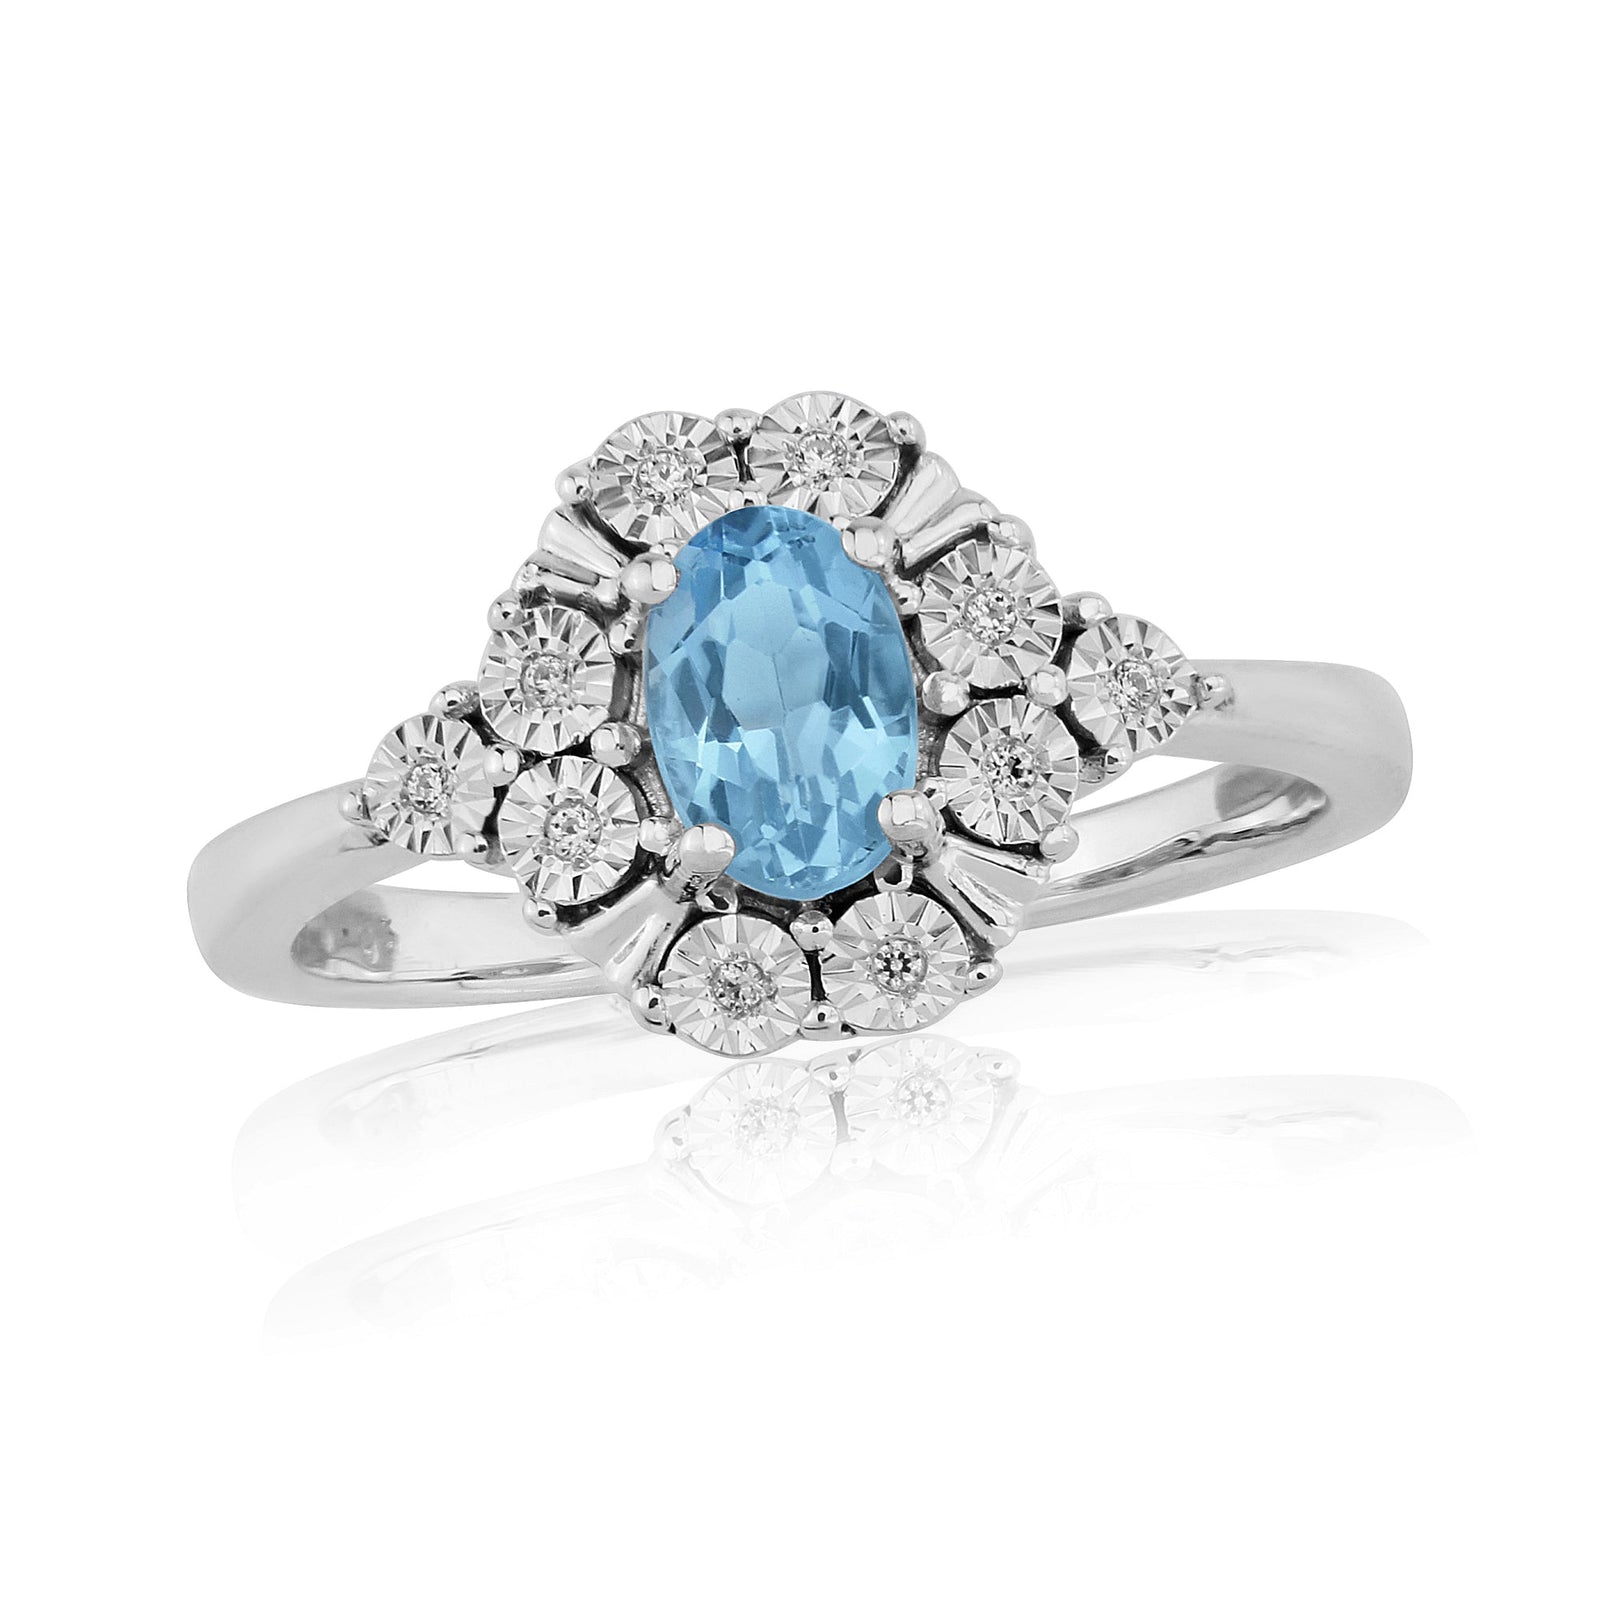 9ct white gold 6x4mm oval blue topaz & miracle plate diamond cluster ring 0.03ct